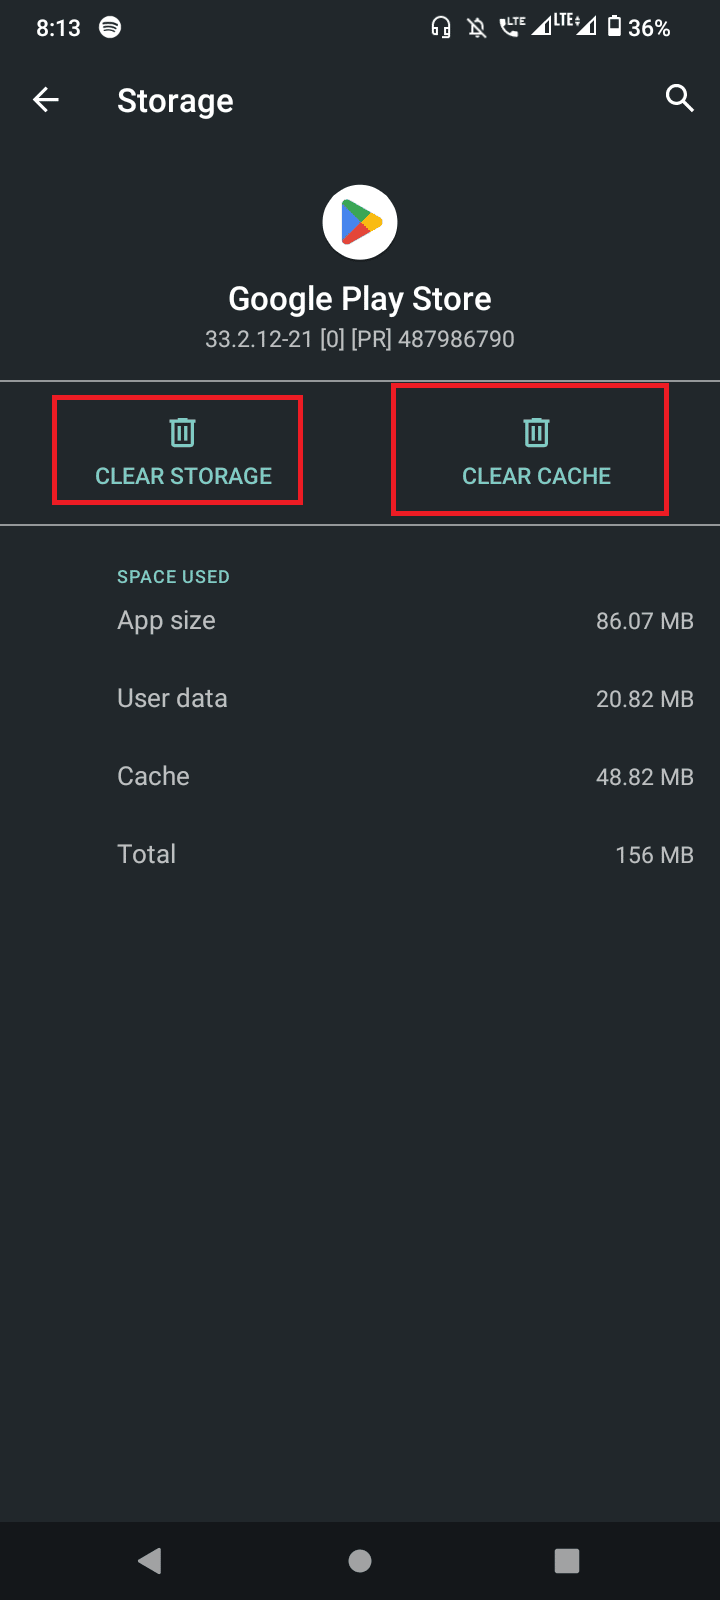 tap on clear cache and clear data